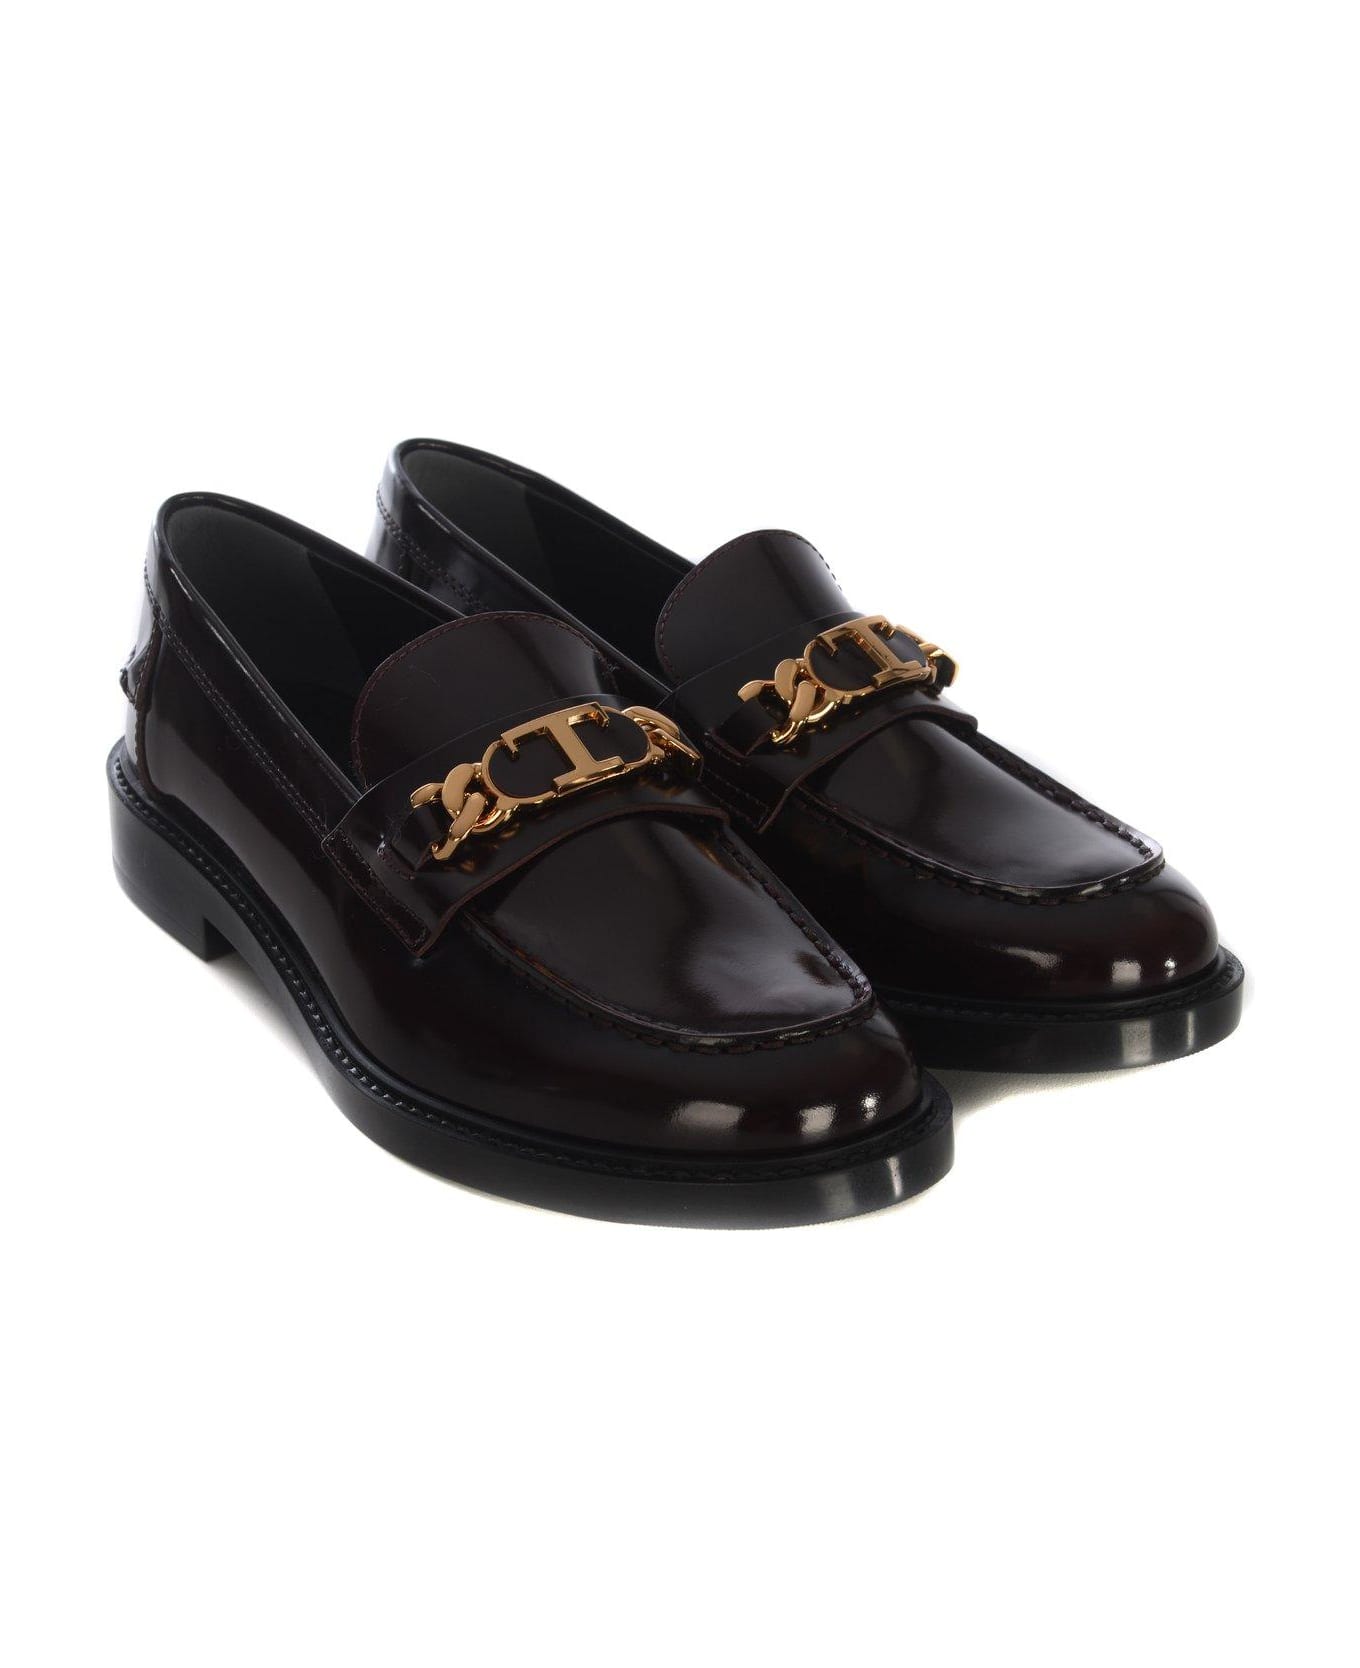 Tod's Logo Plaque Slip-on Loafers - Bordeau